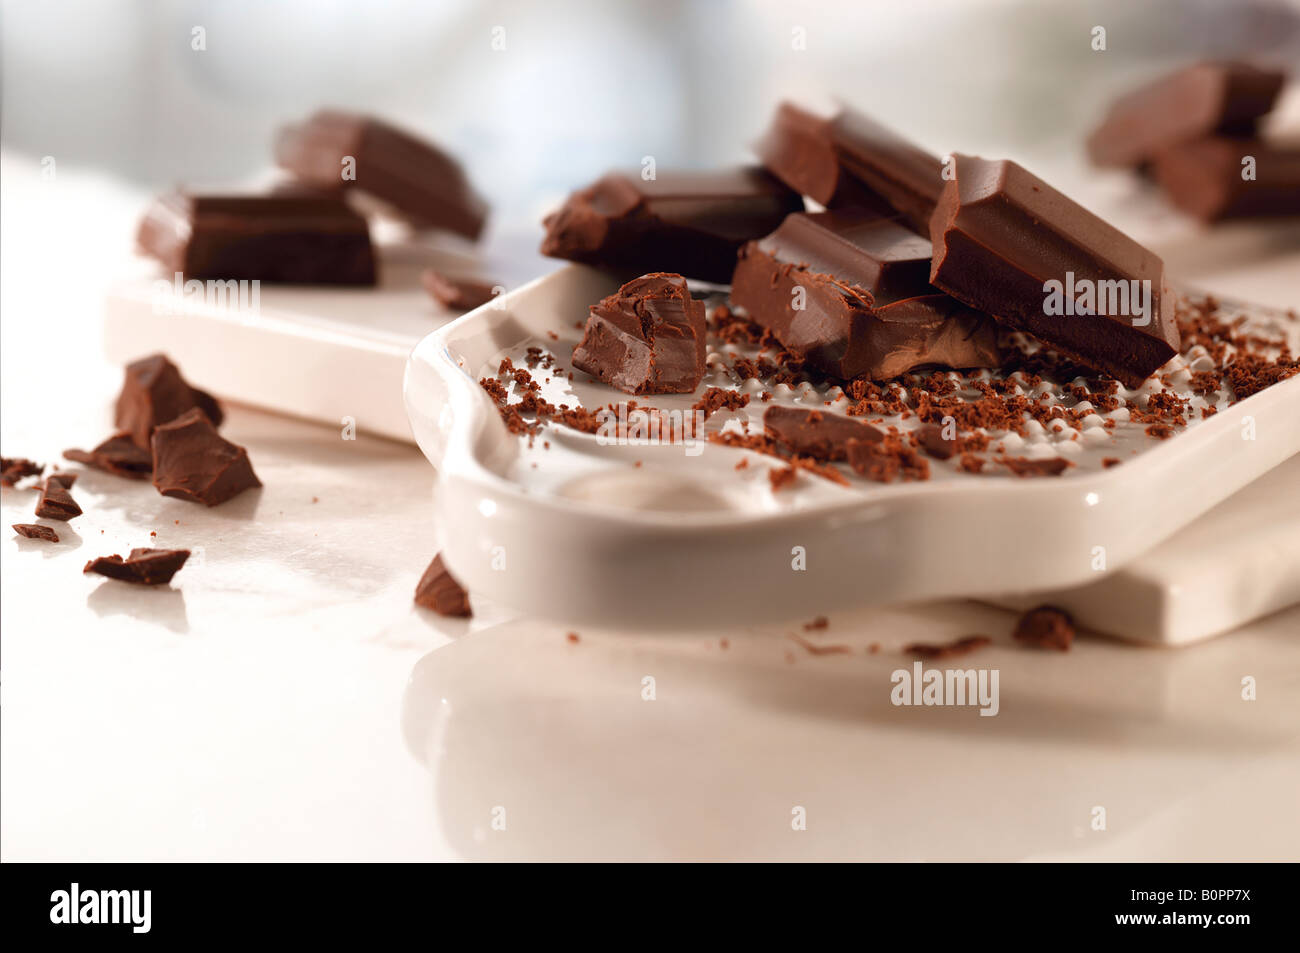 Food photo of chocolate pieces being grated fir a food recipe in a white kitchen setting Stock Photo